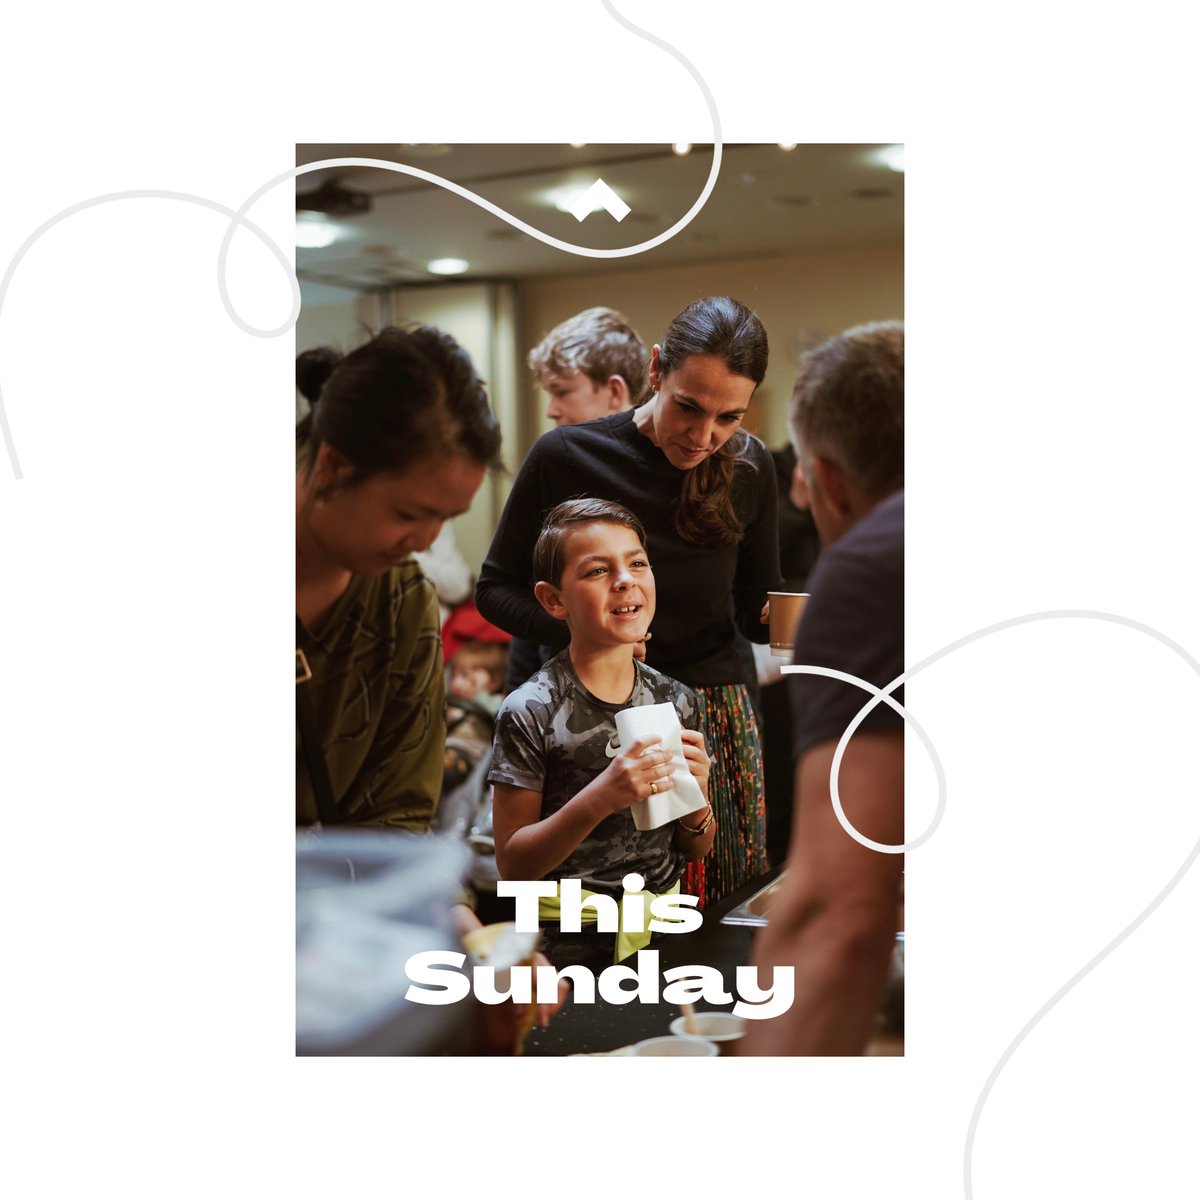 We can't wait to see you this Sunday! Join us at 10.30 am for pastries, coffee, and family worship! Also, join us at 5 pm for pizza. 🍕 Don't forget to book on to our Christmas services tickets are selling out fast!🎄 See you soon🥳